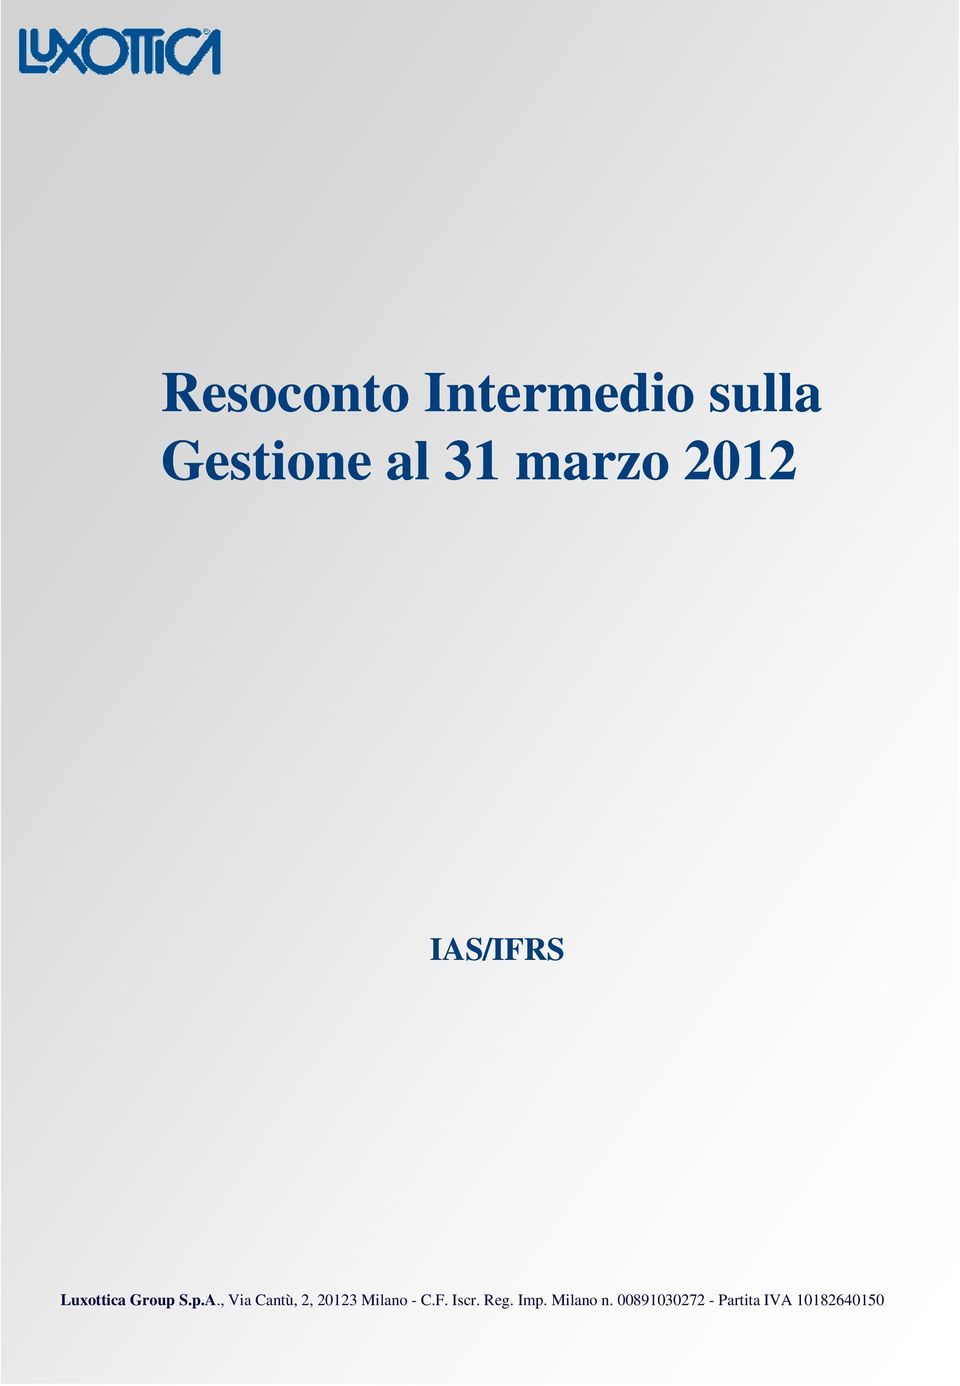 /IFRS Luxottica Group S.p.A.